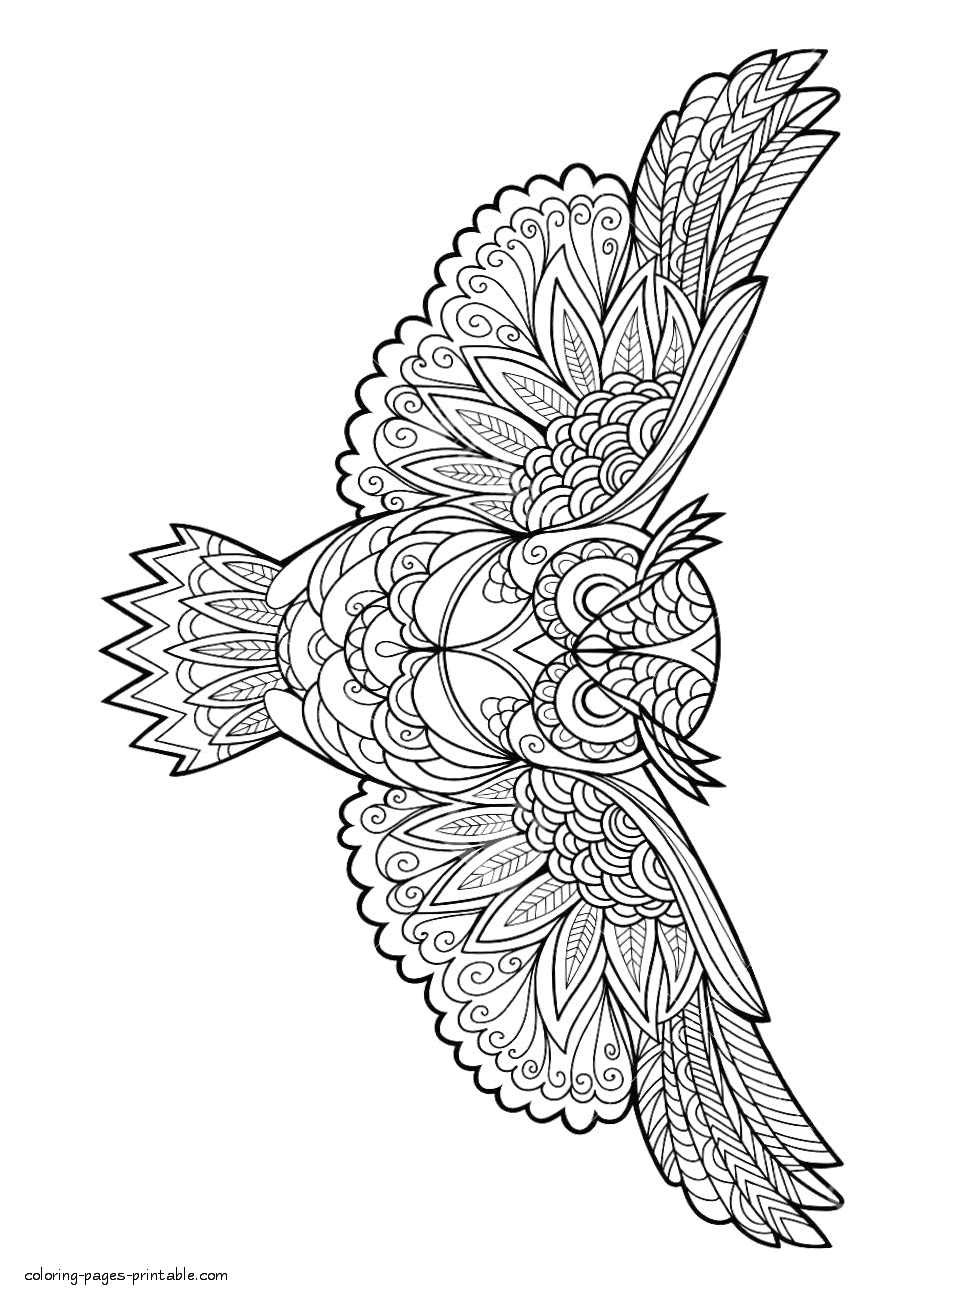 bird-coloring-book-for-adults-coloring-pages-printable-com